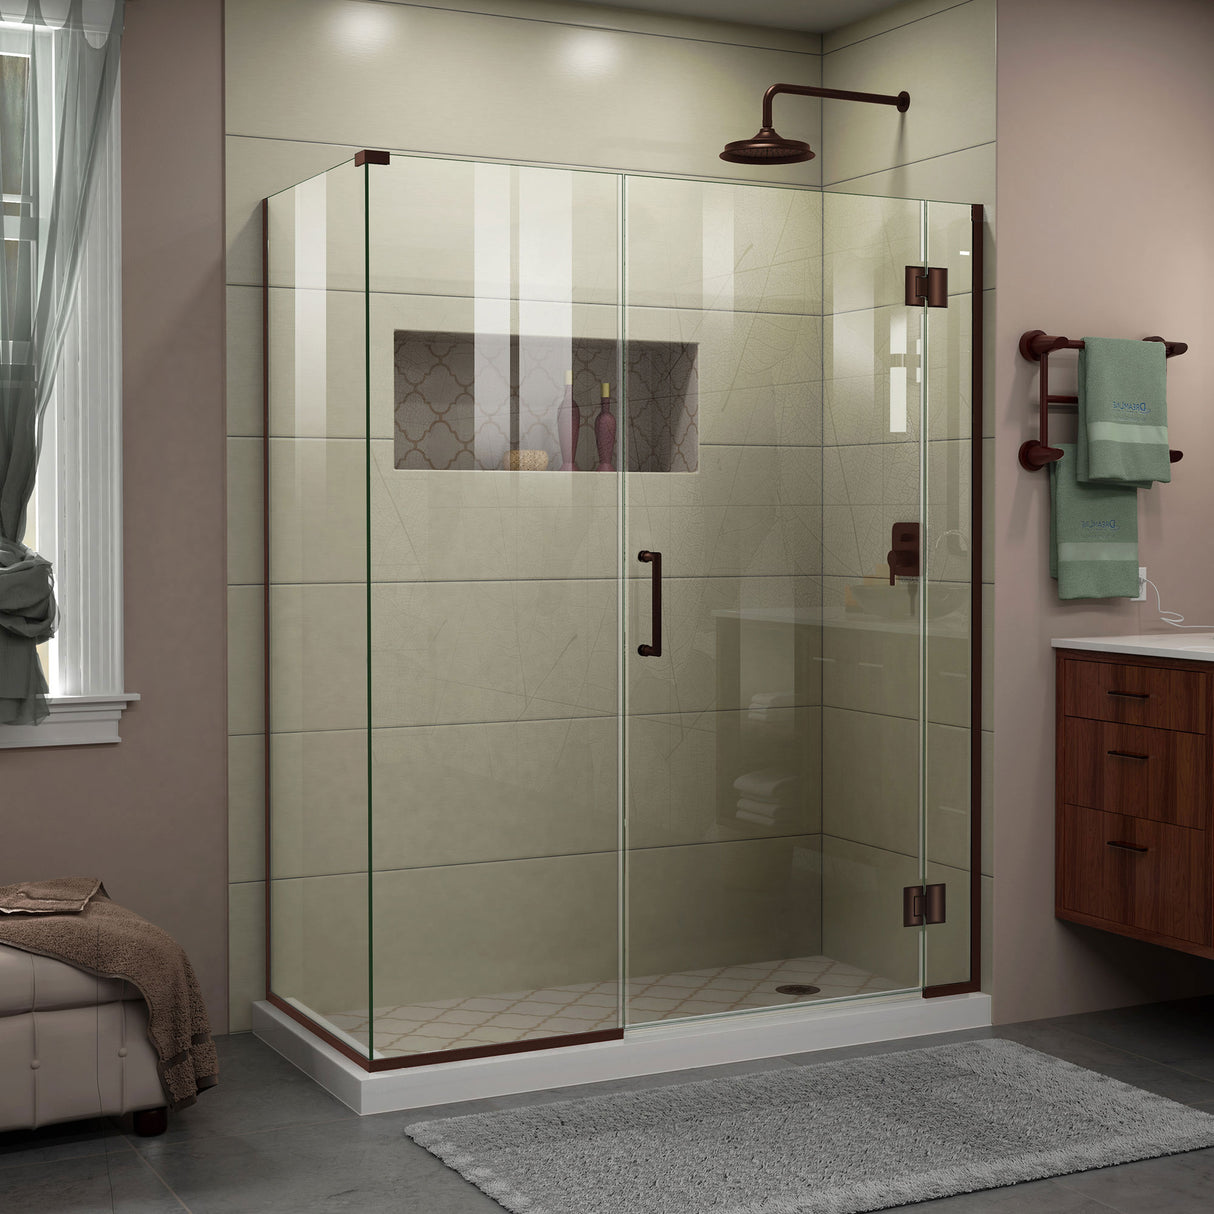 DreamLine Unidoor-X 47 in. W x 30 3/8 in. D x 72 in. H Frameless Hinged Shower Enclosure in Oil Rubbed Bronze